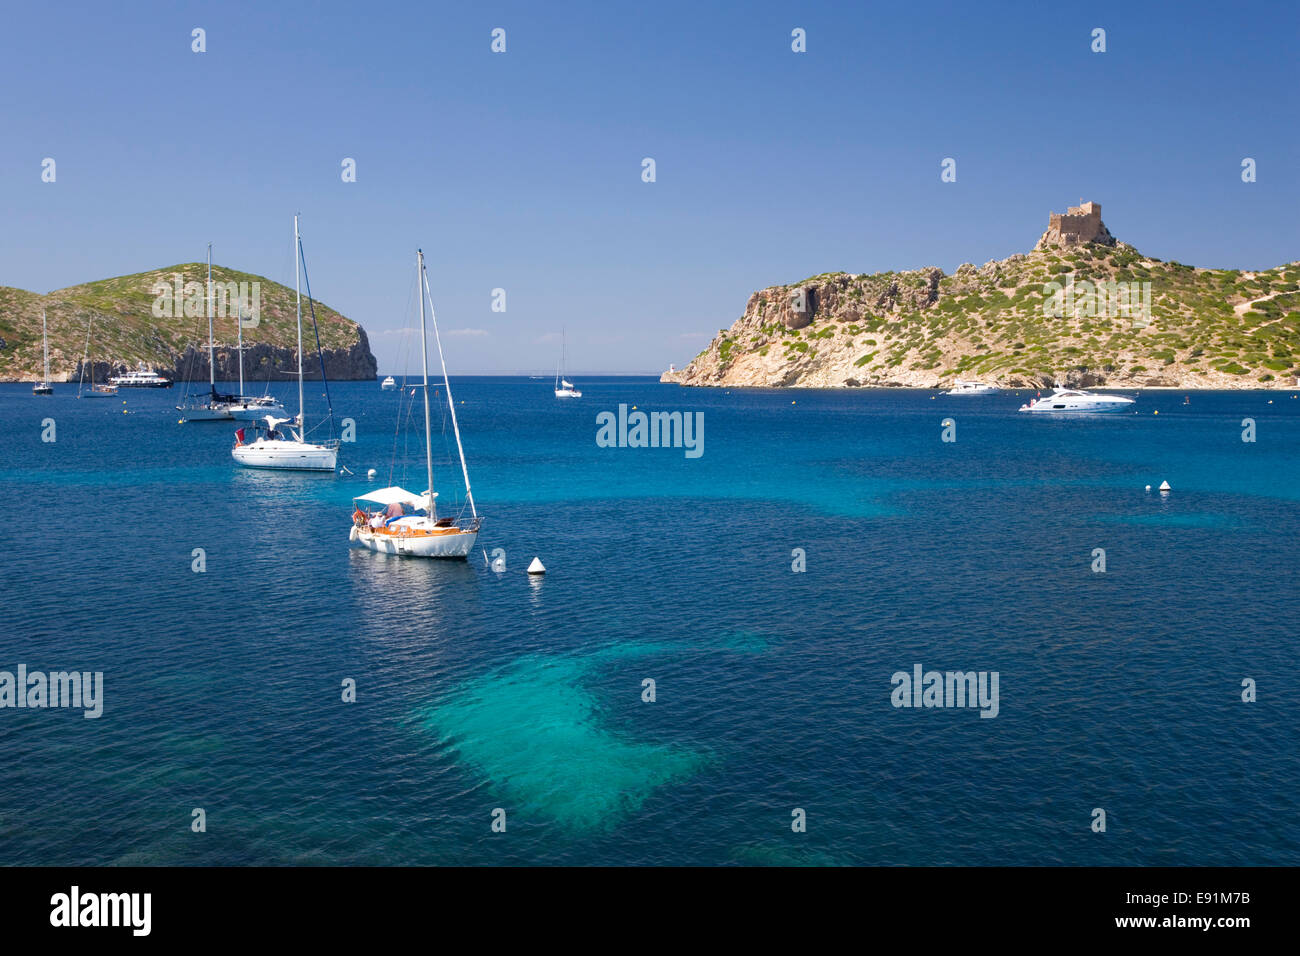 Island of Cabrera, Mallorca, Balearic Islands, Spain. View across bay to the 14th century castle, yachts at anchor. Stock Photo